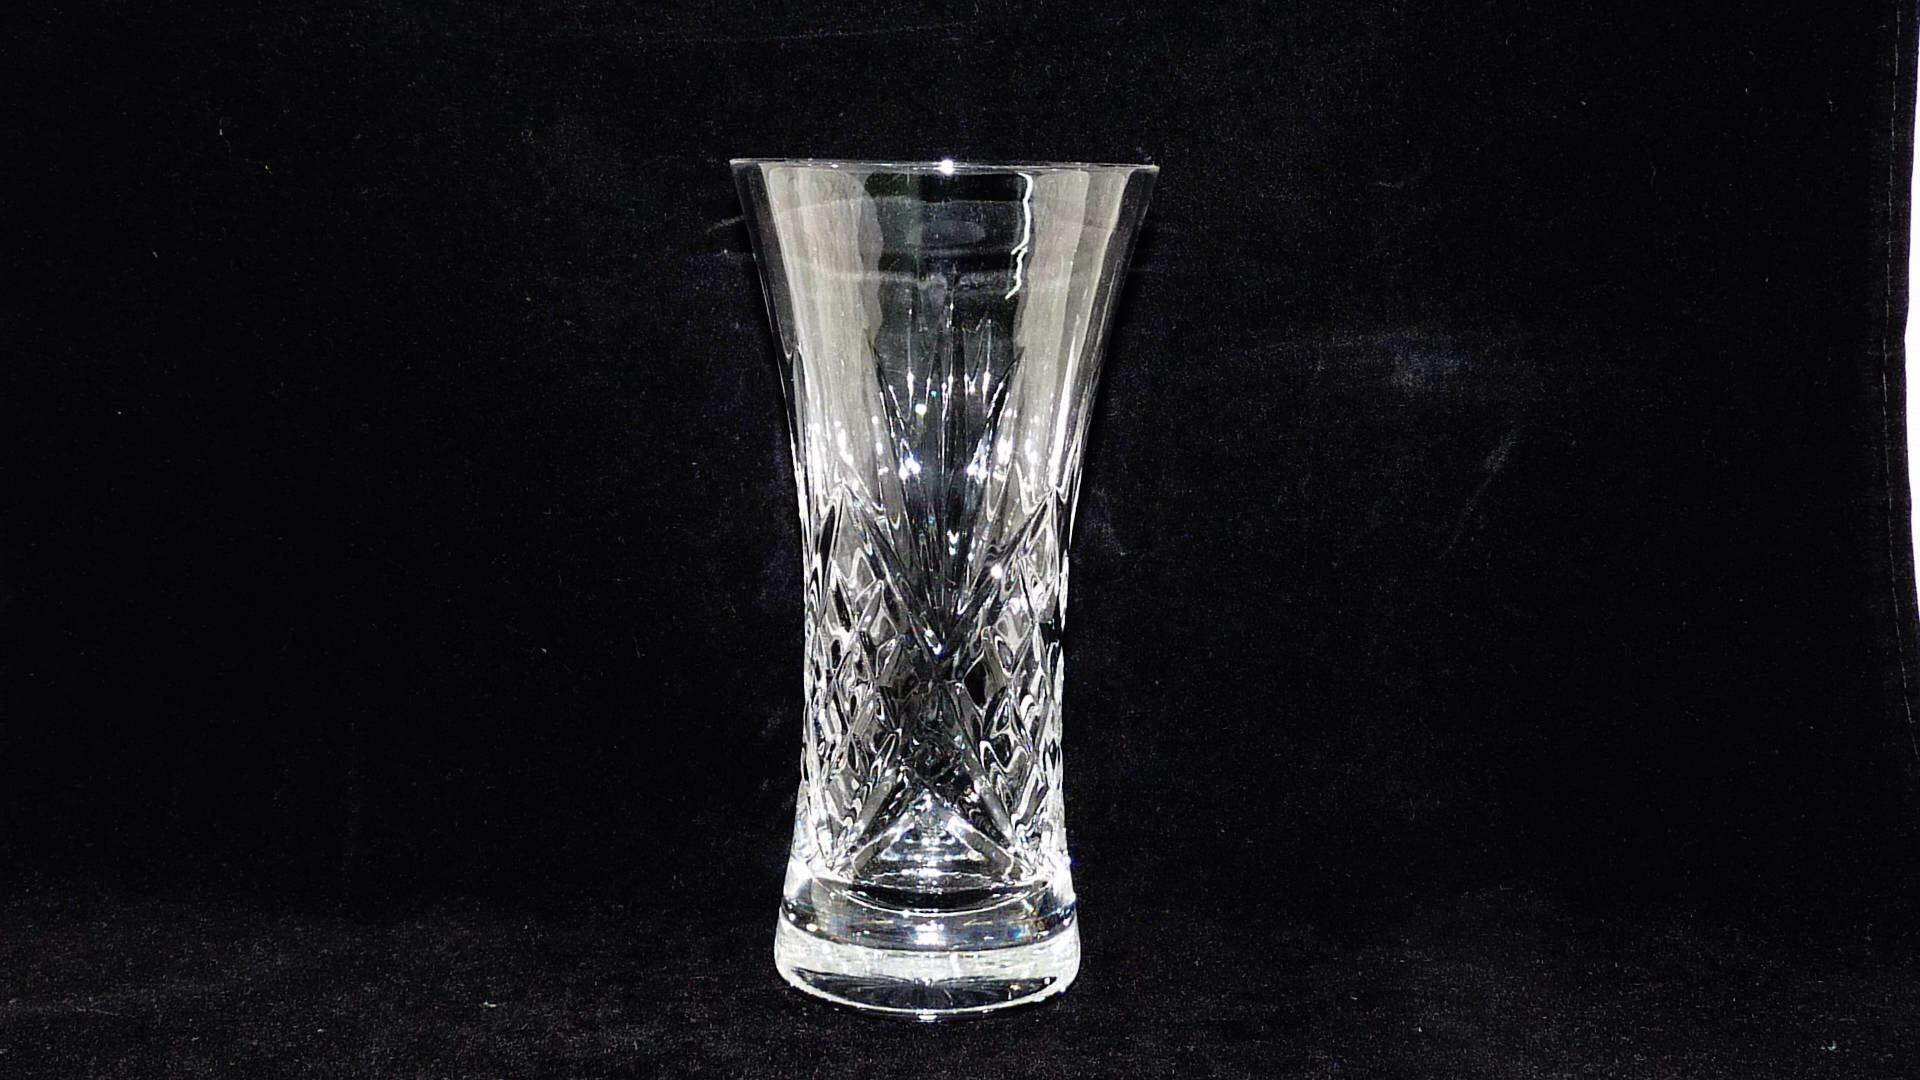 26 Great Large Brandy Snifter Vase 2024 free download large brandy snifter vase of vintage clear glass vases photos excited to share the latest inside vintage clear glass vases photos excited to share the latest addition to my etsy shop small